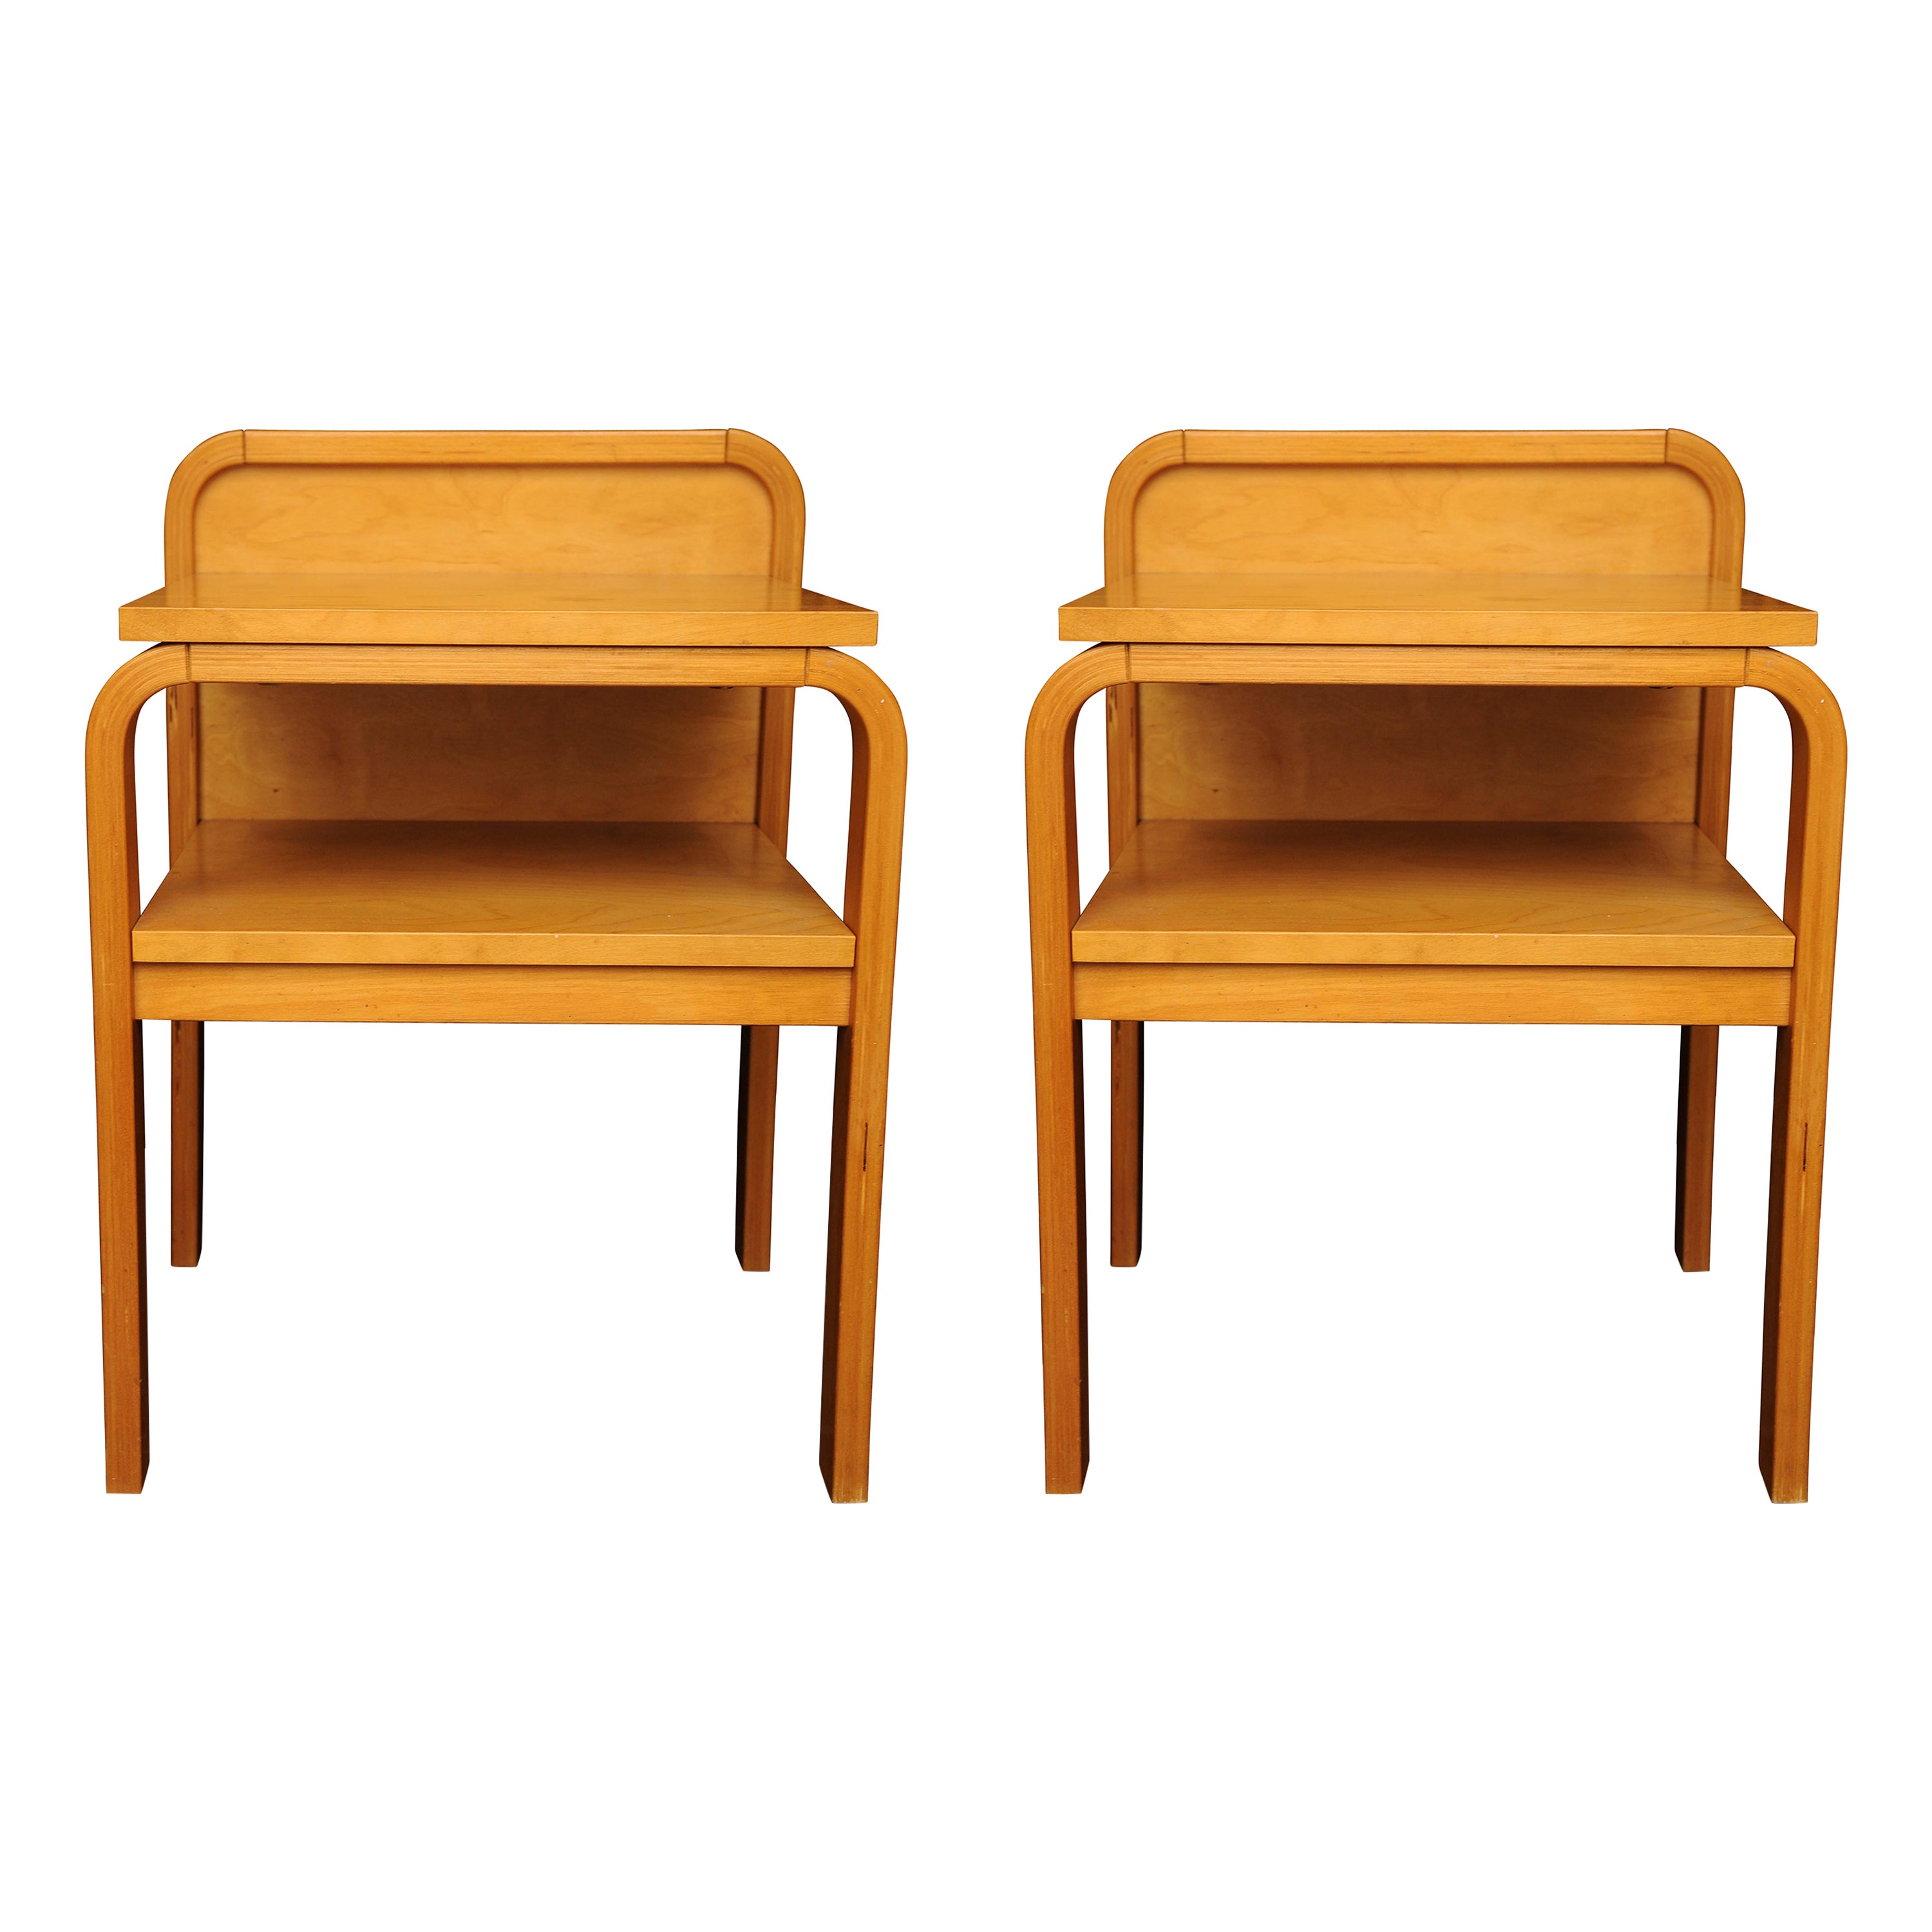 Pair Mid Century Modern Isku of Finland Bent Plywood Birch Bedside Tables, 1980s For Sale